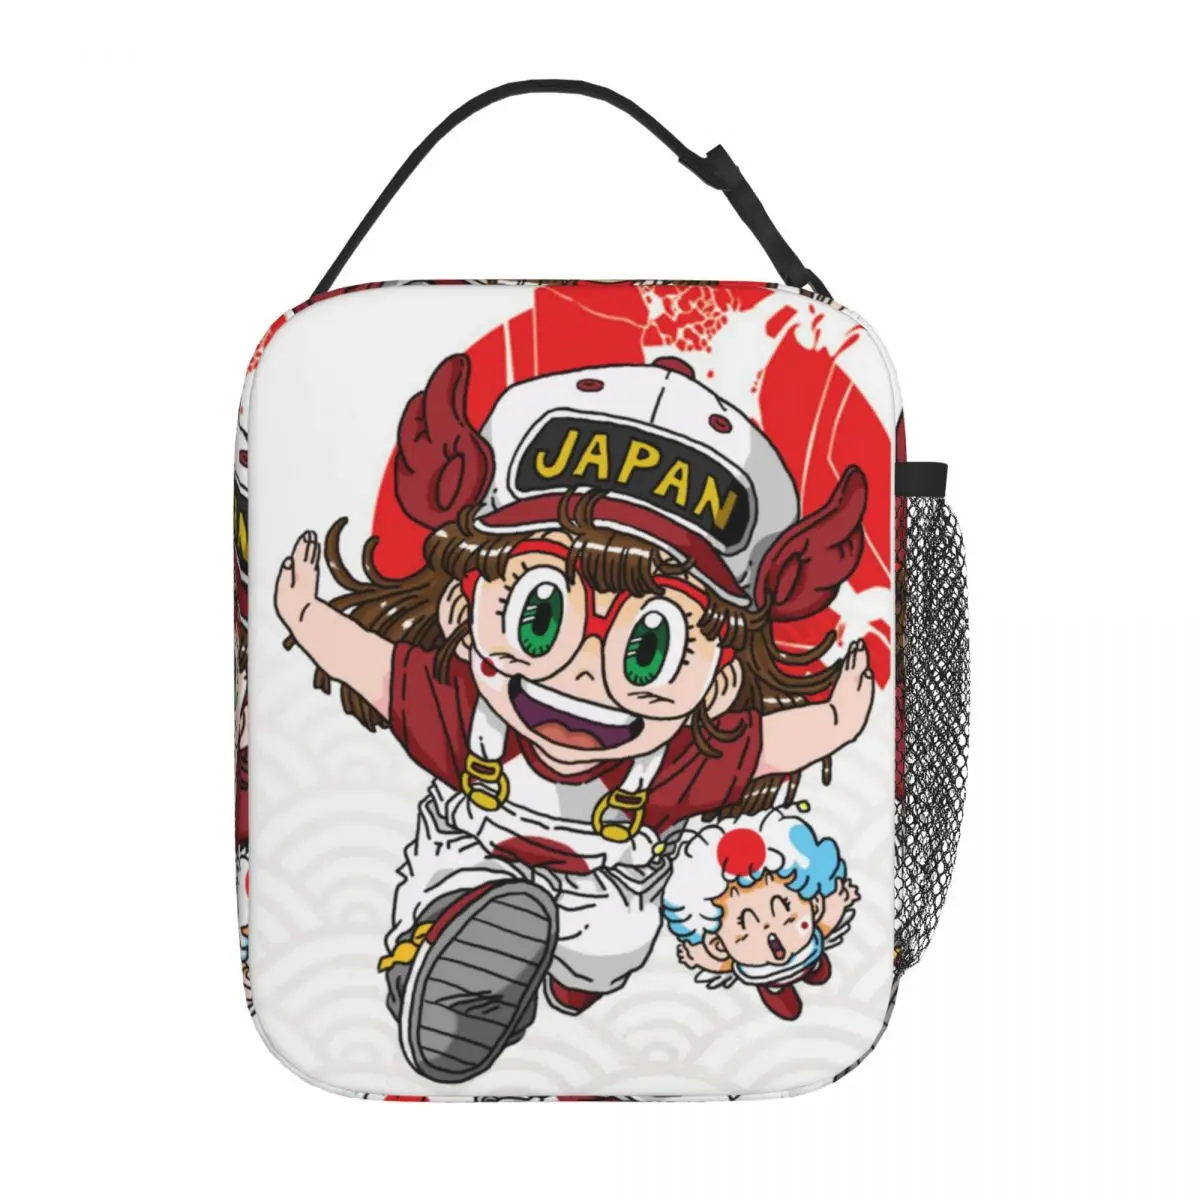 

Dr Slump Arale Norimaki Thermal Insulated Lunch Bag School Reusable Lunch Container Thermal Cooler Food Box